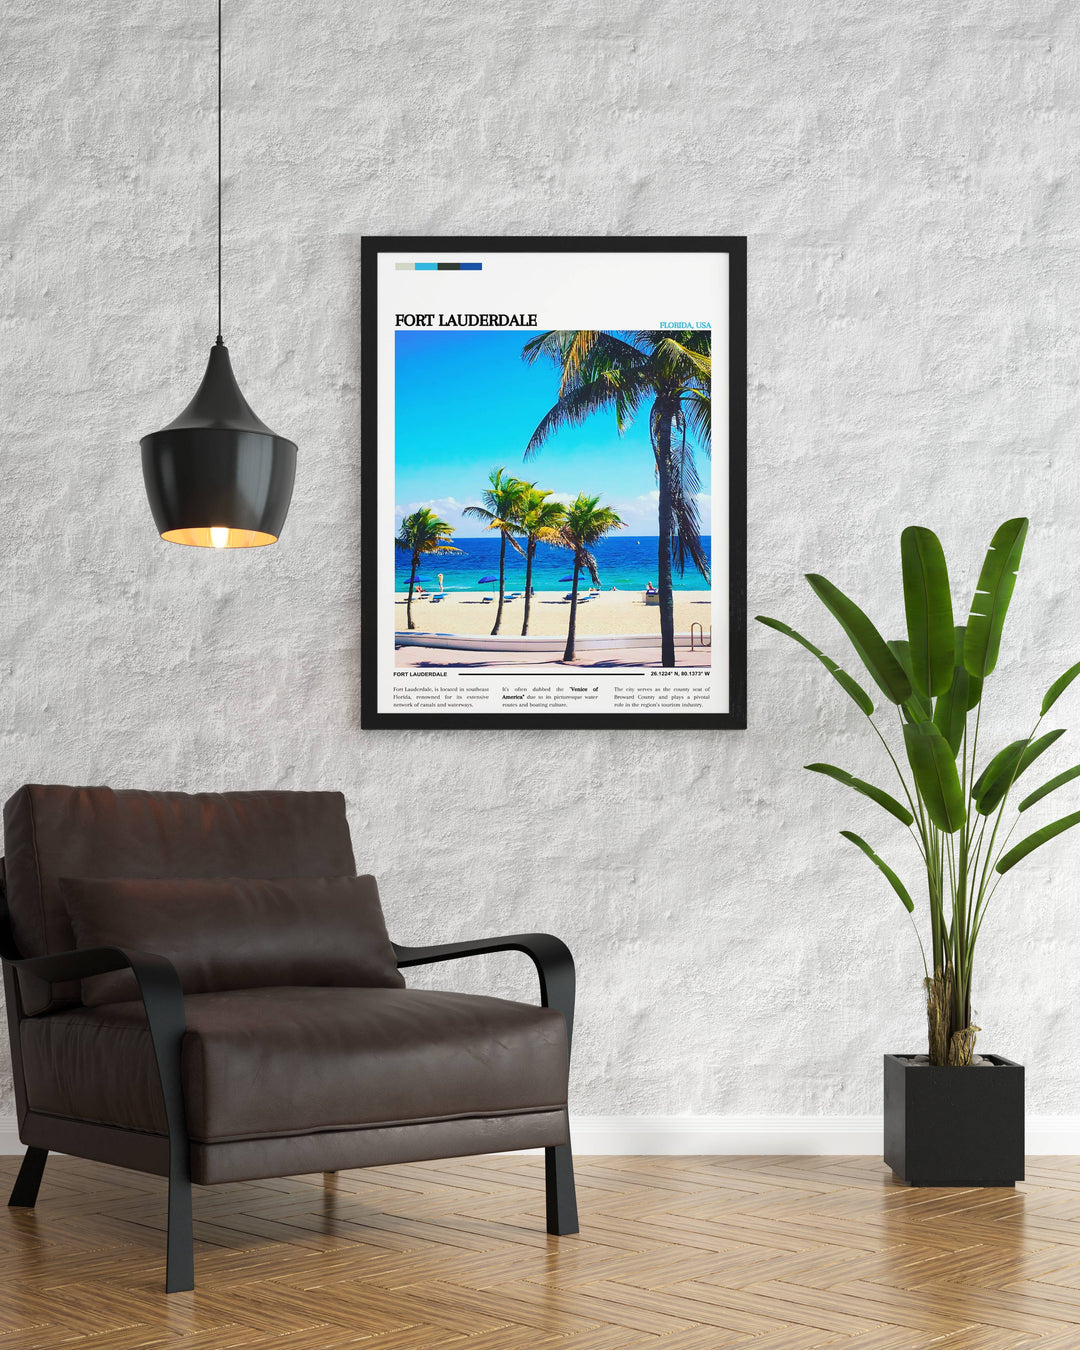 Stylish Florida travel print with a retro design featuring Fort Lauderdale's iconic beachfront promenade, suitable for adding a vintage flair to your home decor.